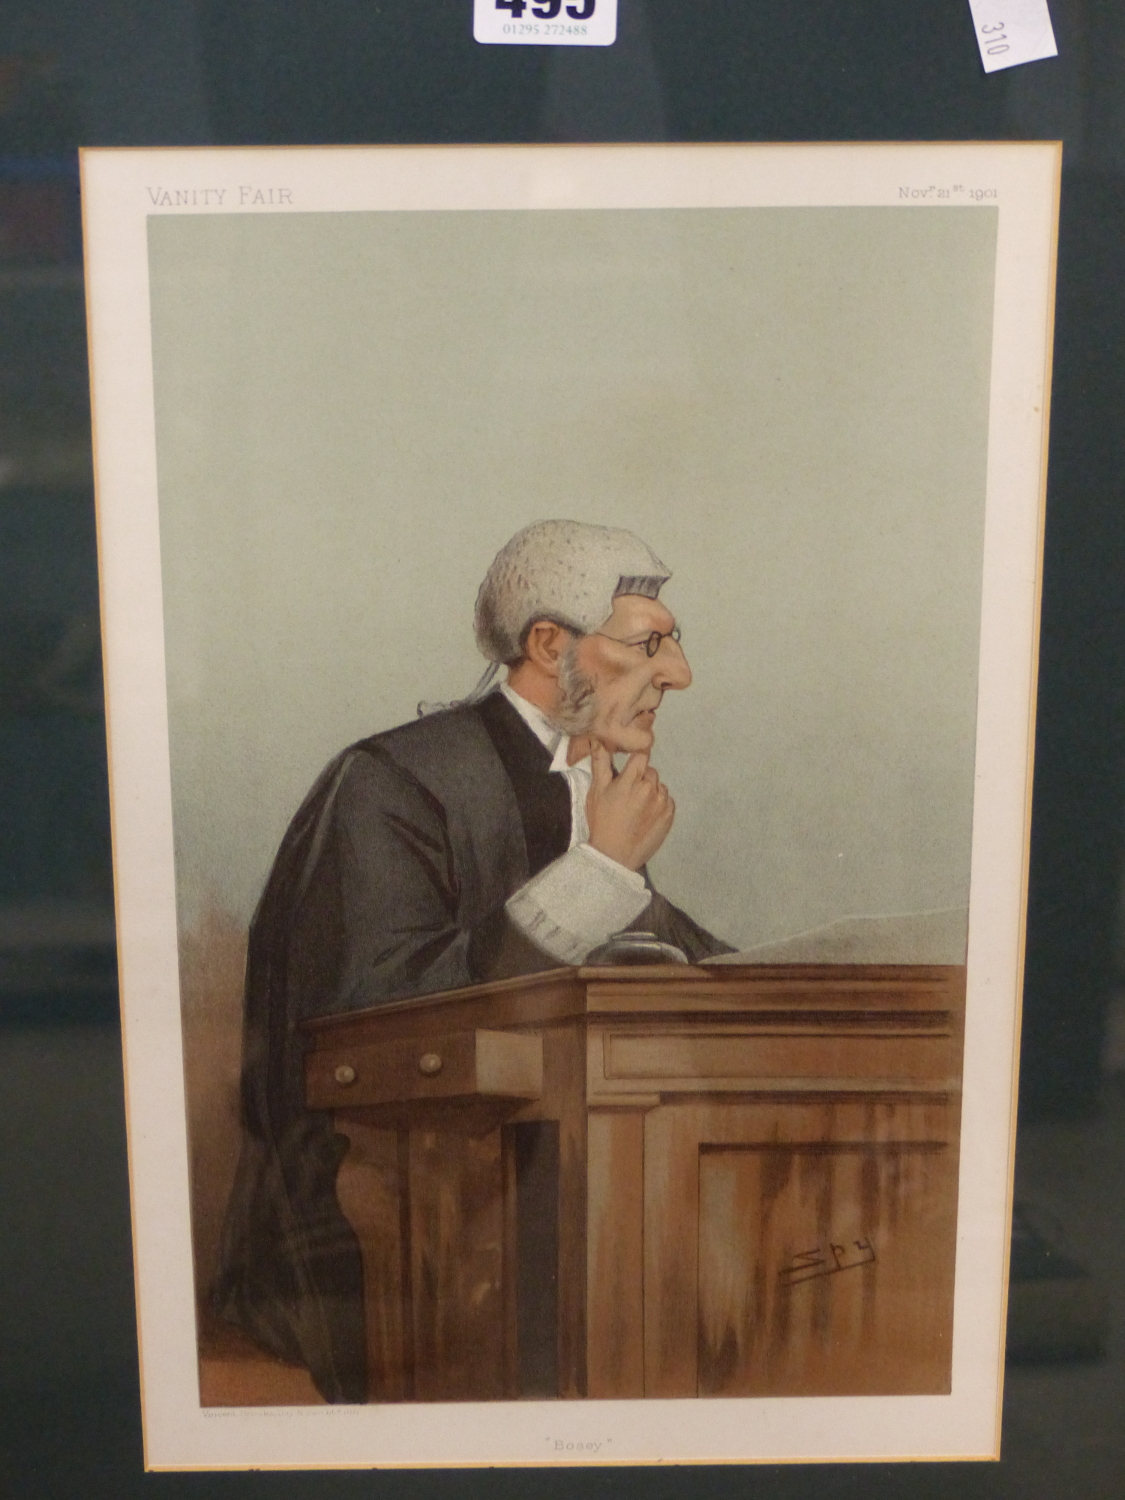 TEN VANITY FAIR PRINTS, MOSTLY SPY AND APE; UNCLE SAM, STATESMEN NO.87, MEN OF THE DAY NO. 1, AN OLD